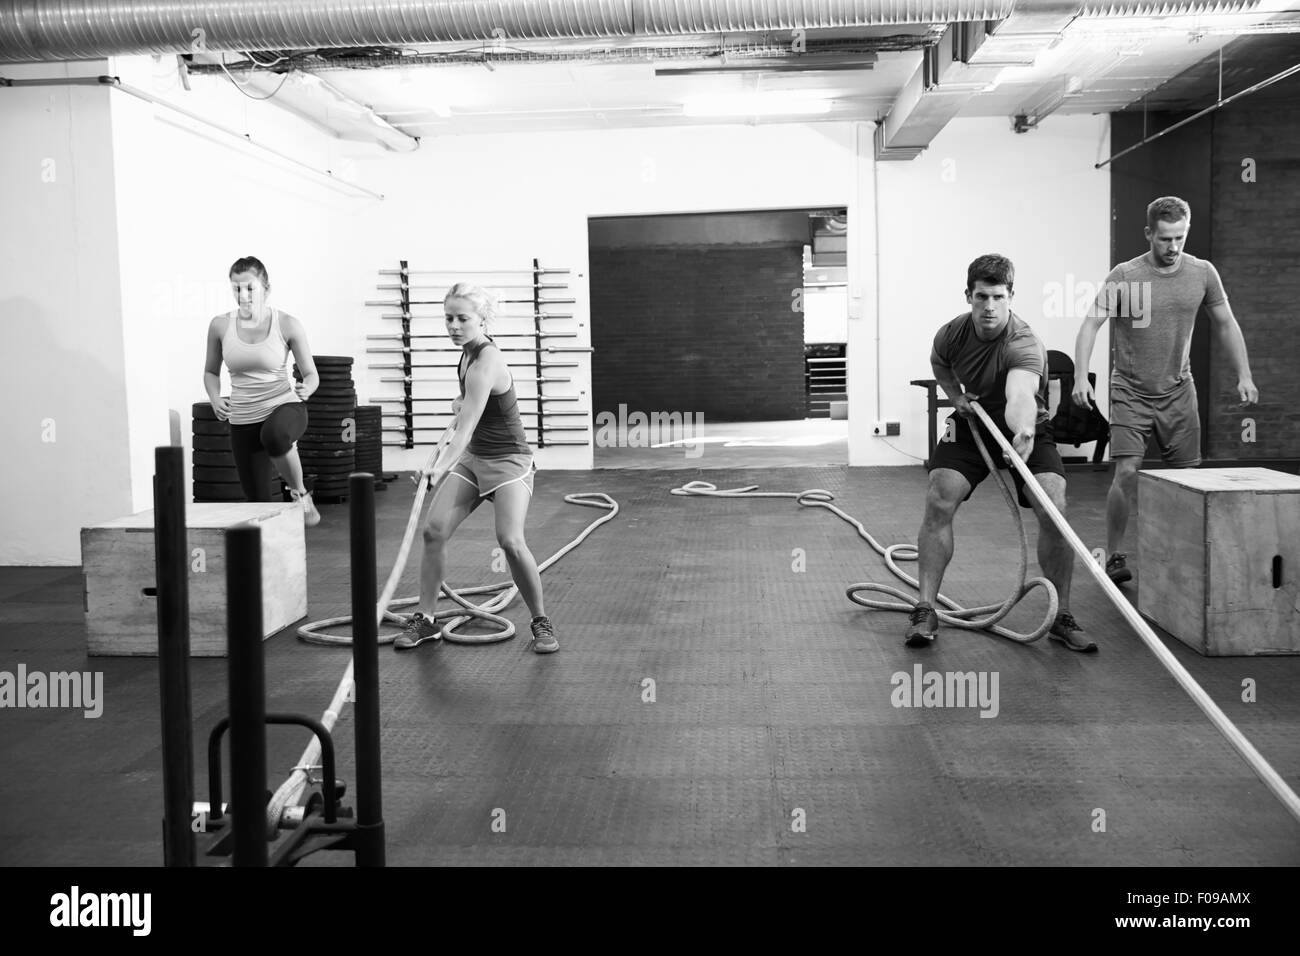 Black And White Shot Of People In Gym Circuit Training Stock Photo